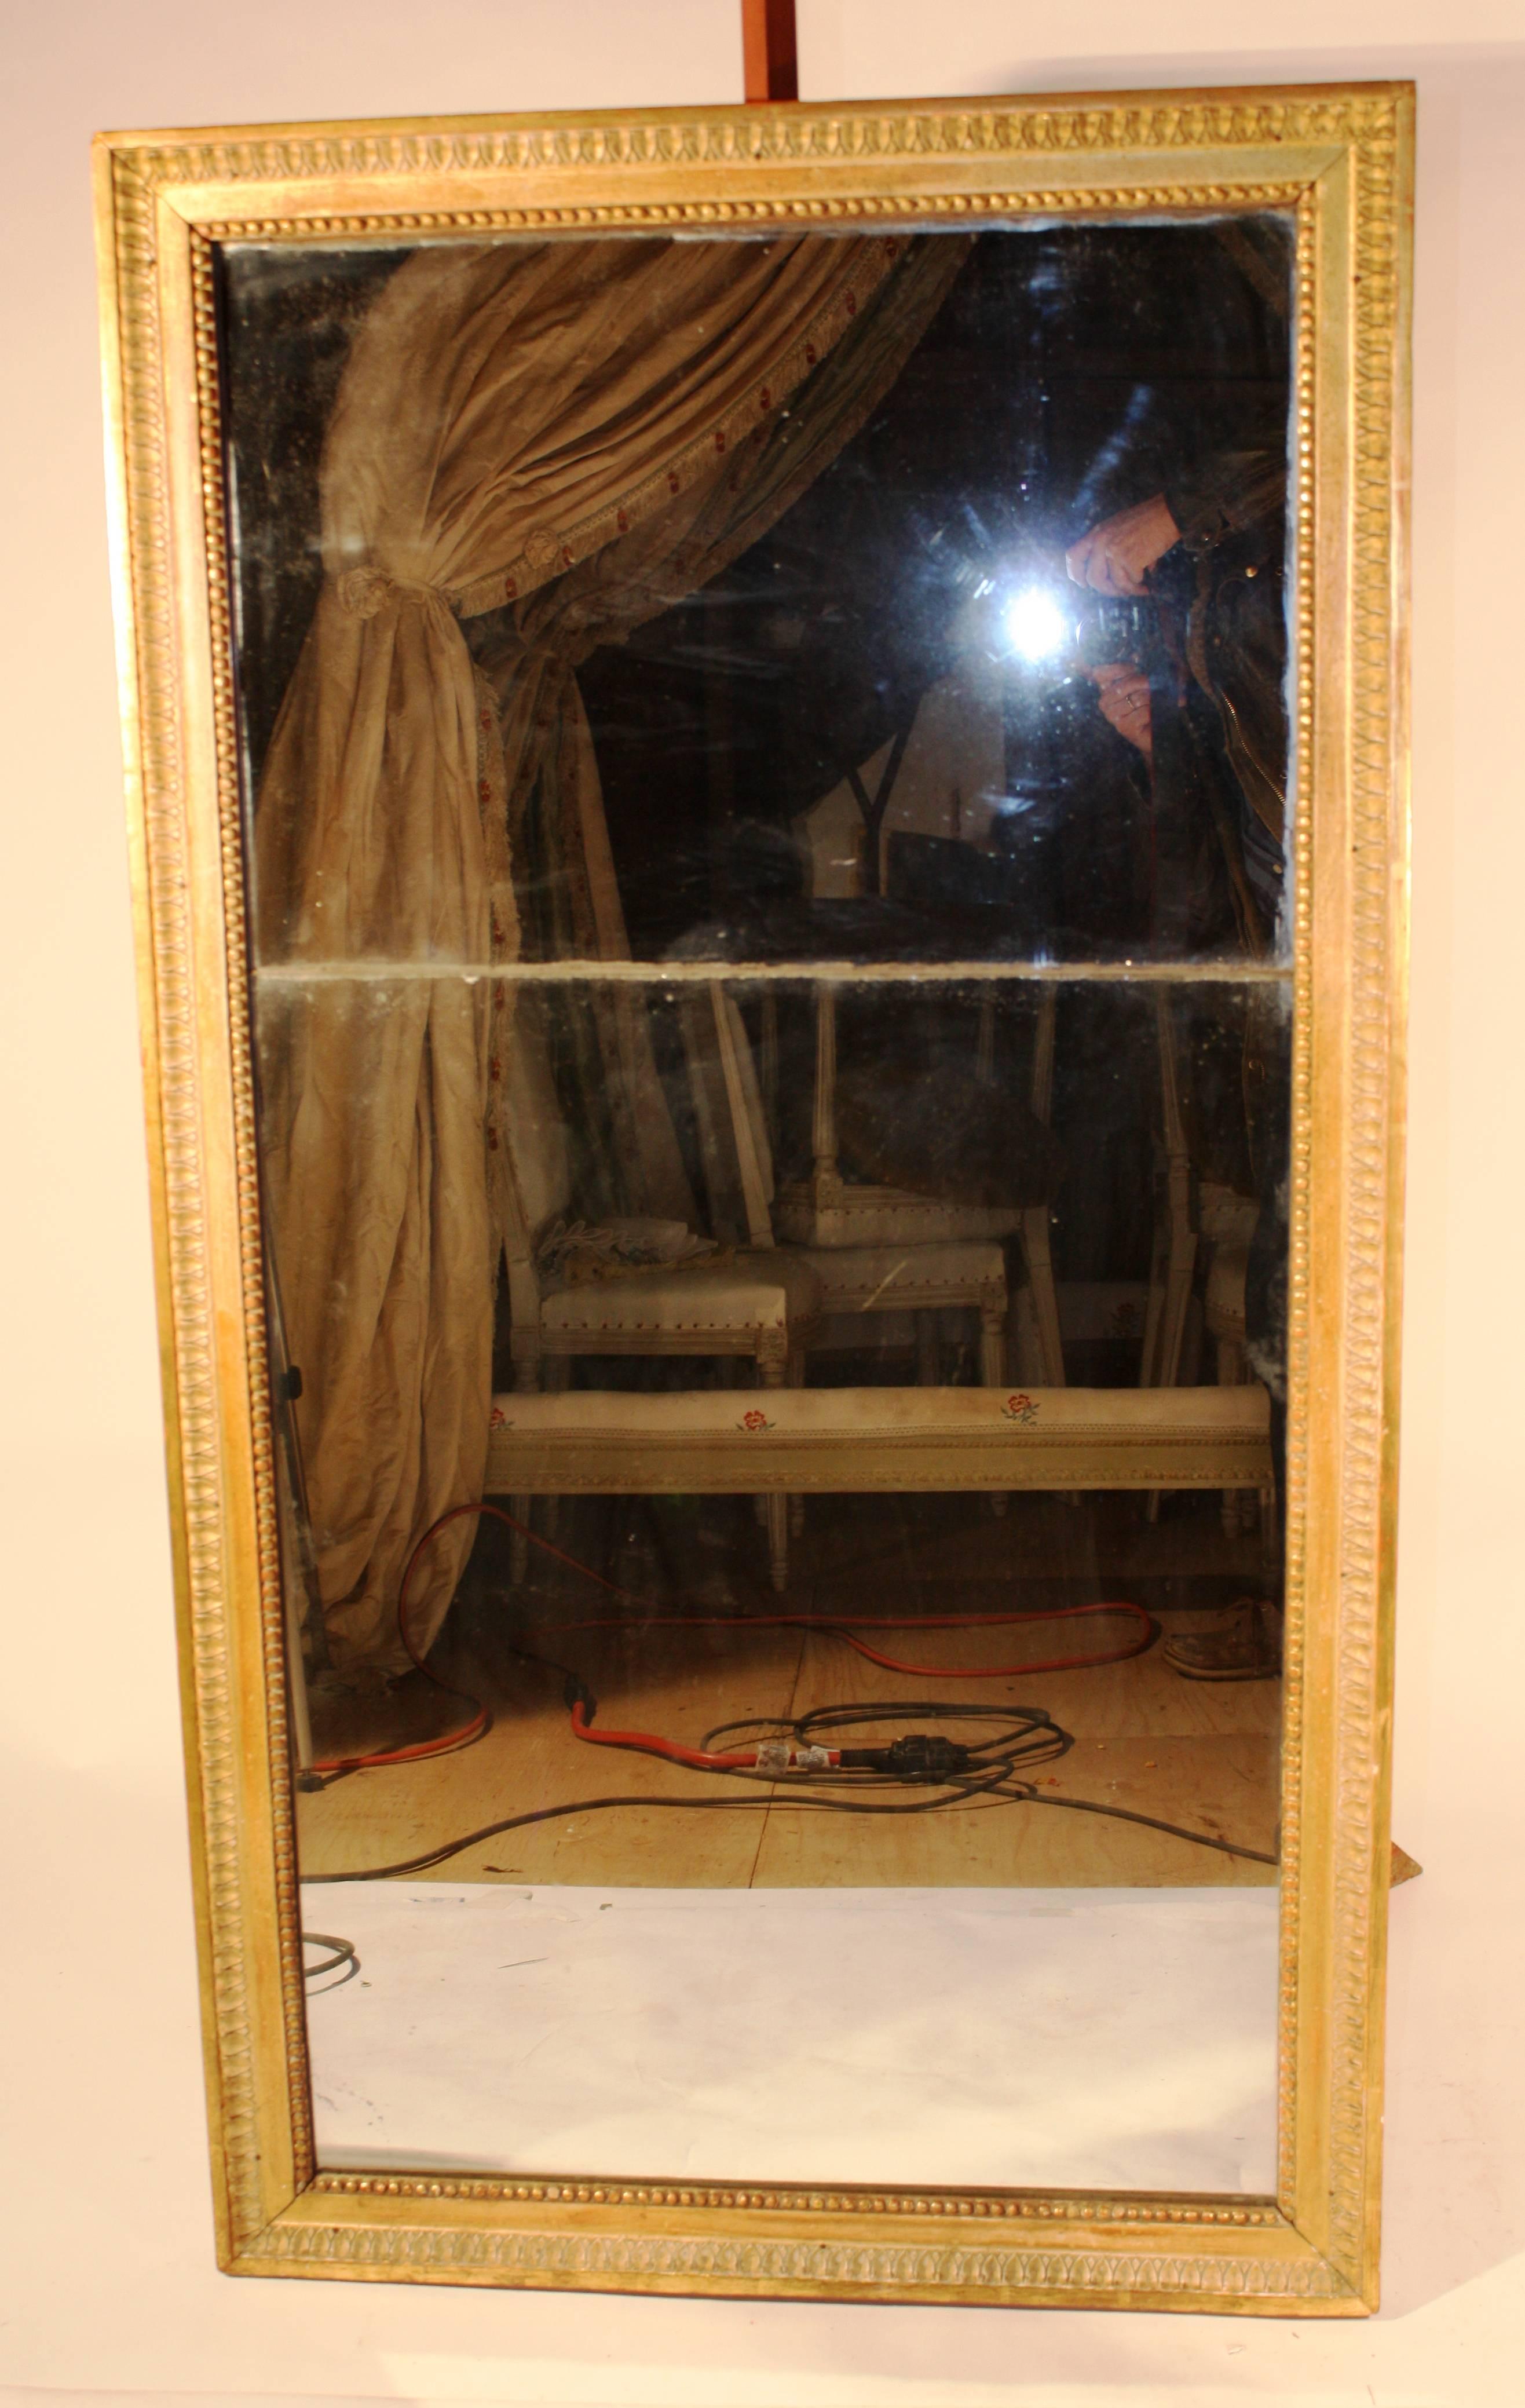 A fine Louis XVI period gilt-wood mirror, late 18th century, with two-part mercury plate (original) in excellent condition. The gilded frame bordered in acanthus leaf decoration with a beaded inner border.